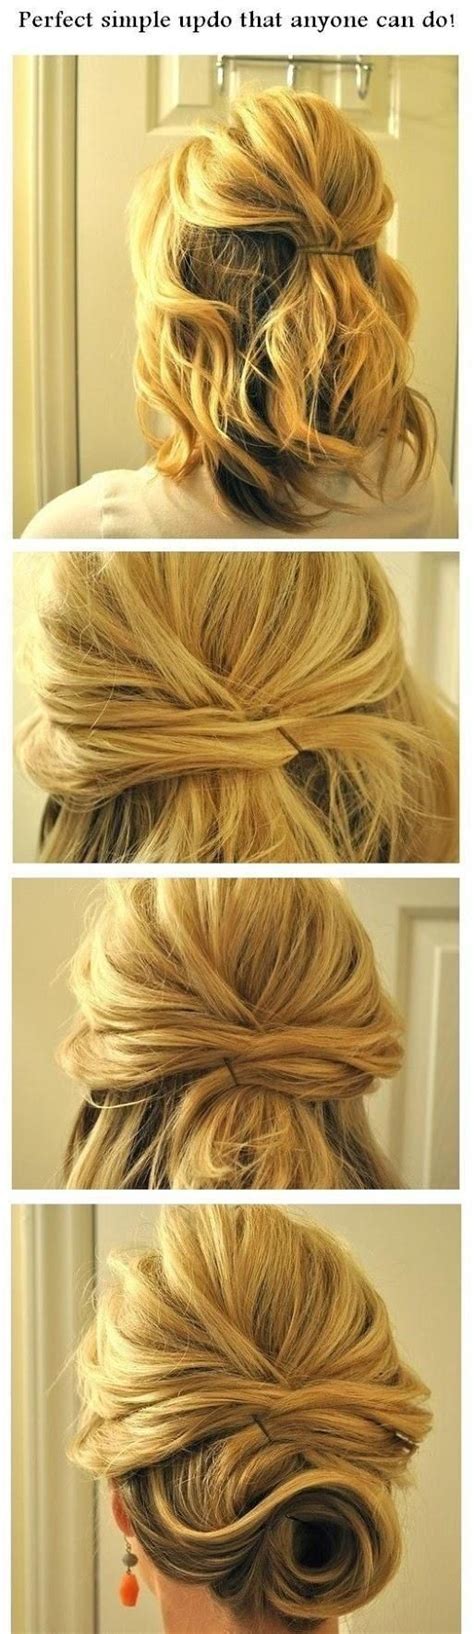 Easy Do It Yourself Updo For Short Hair 51 Easy Updos For Short Hair To Do Yourself Here Is